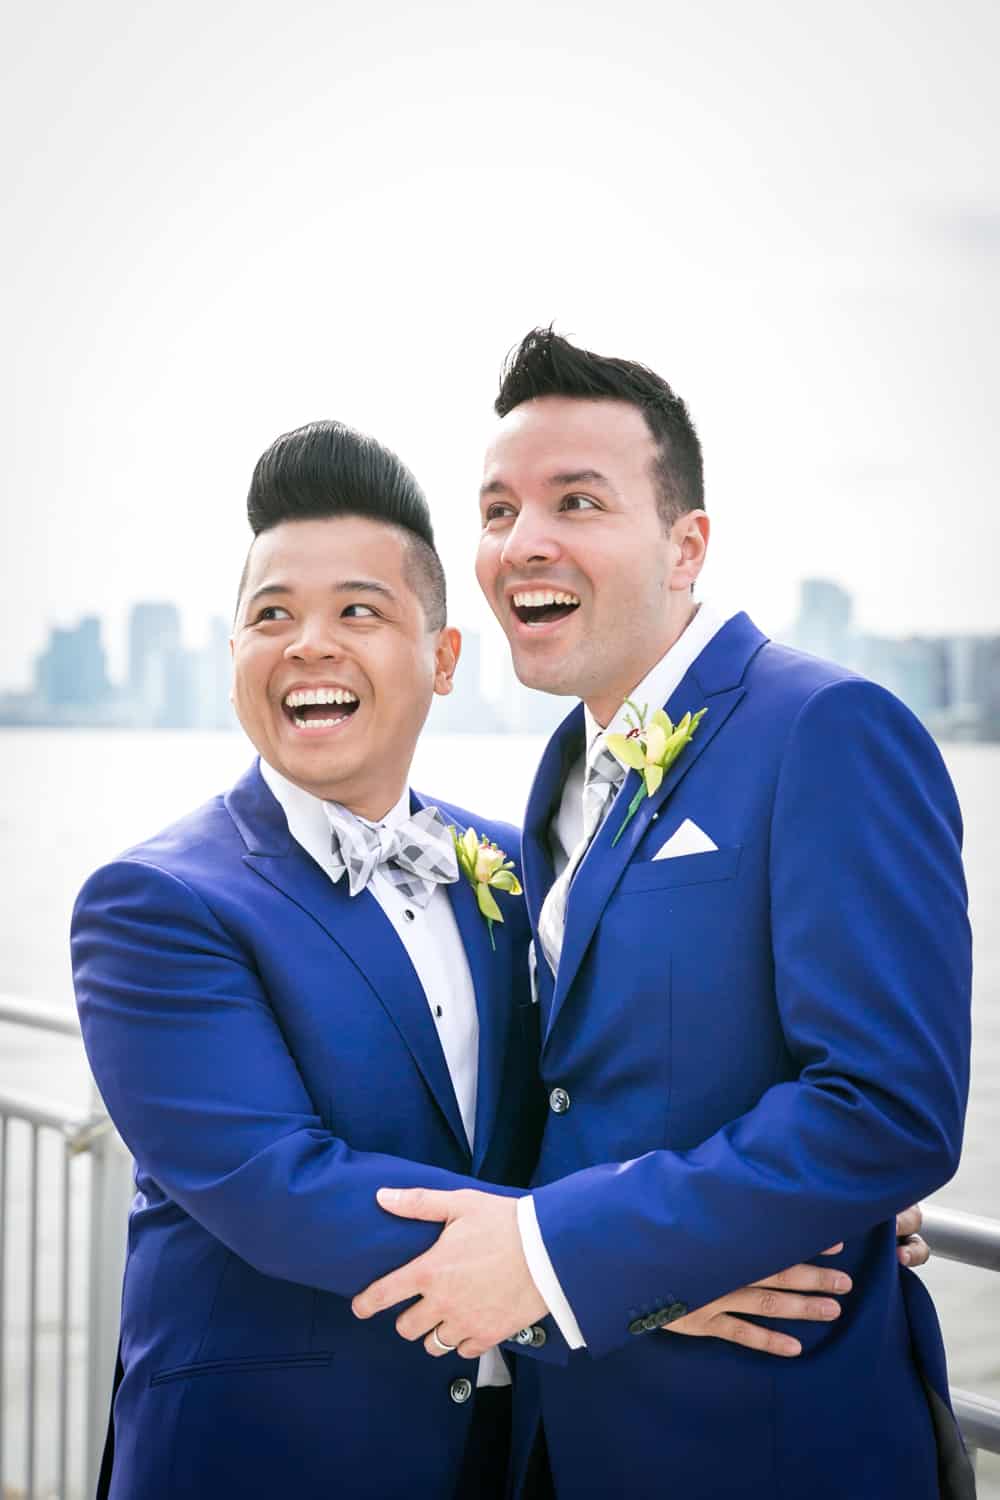 Two grooms hugging by Hudson River waterfront